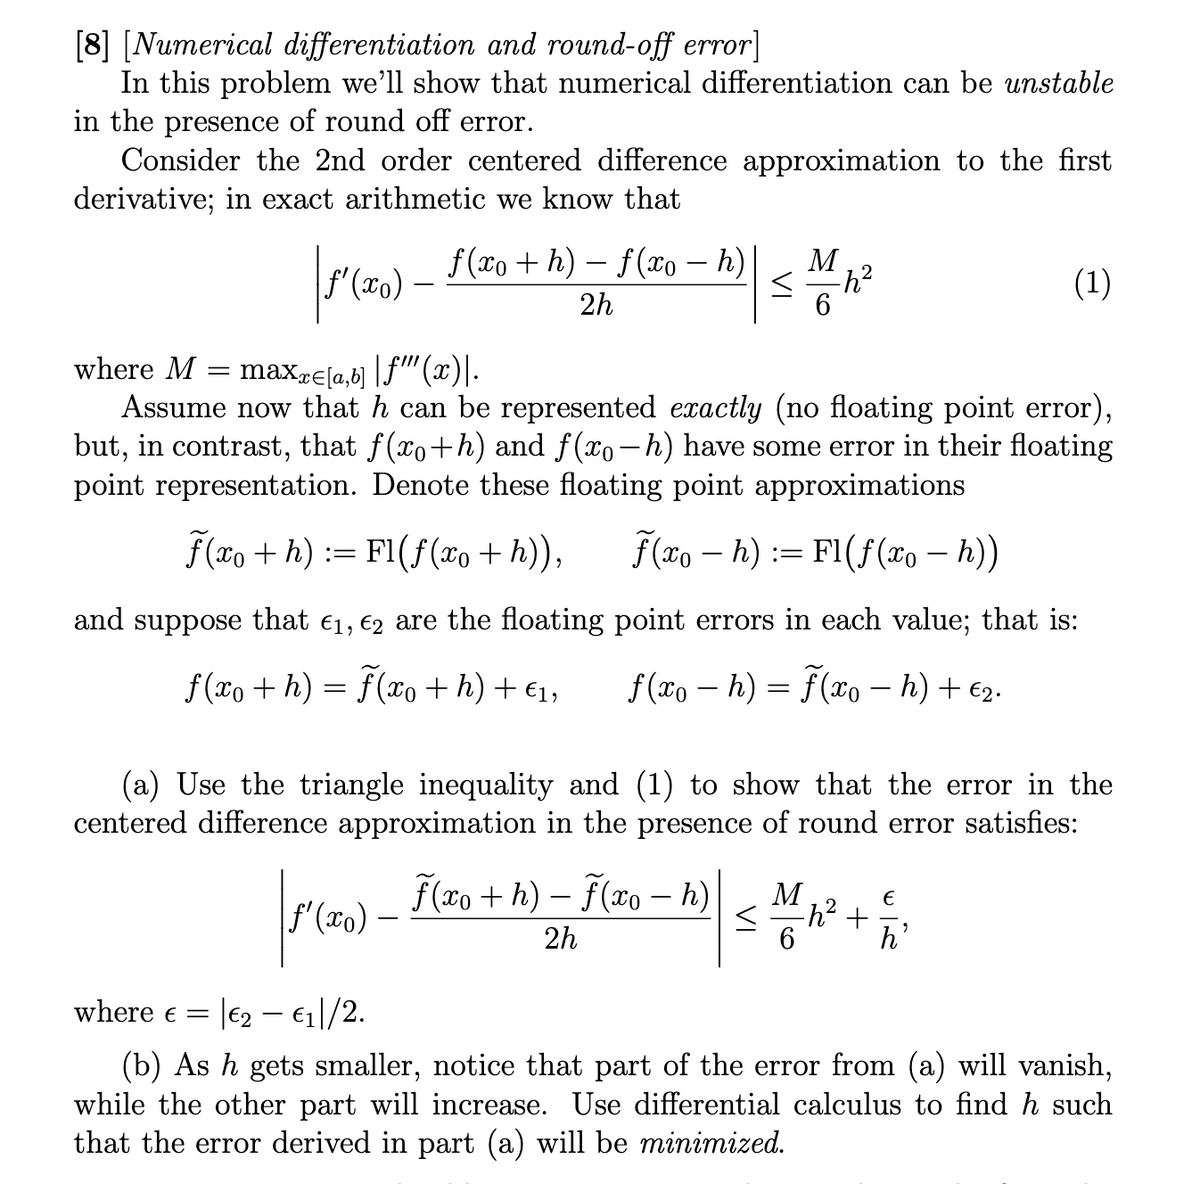 [8] [Numerical differentiation and round-off error]
In this problem we'll show that numerical differentiation can be unstable
in the presence of round off error.
Consider the 2nd order centered difference approximation to the first
derivative; in exact arithmetic we know that
|ƒ′ (xo) — ƒ (xo + h) — ƒ(xo — h)
_ = — | ≤ 1 42²
M
<
-h²
2h
6
where M = maxx=[a,b] |ƒ"" (x).
Assume now that h can be represented exactly (no floating point error),
but, in contrast, that f(x+h) and f(x−h) have some error in their floating
point representation. Denote these floating point approximations
f(xo+h): Fl(f(xo + h)), f(xoh): Fl(f(xo - h))
and suppose that €1₁, €2 are the floating
f(xo + h) = f(xo + h) + €₁,
(1)
ƒ'(xo)
point errors in each value; that is:
f(xo - h) = f(xo - h) + €2.
(a) Use the triangle inequality and (1) to show that the error in the
centered difference approximation in the presence of round error satisfies:
М
f(xo+h)-f(xo – h)
-
2
| S M N² + 1/
< -h²
2h
6
h'
where € =
|€2- €₁|/2.
(b) As h gets smaller, notice that part of the error from (a) will vanish,
while the other part will increase. Use differential calculus to find h such
that the error derived in part (a) will be minimized.